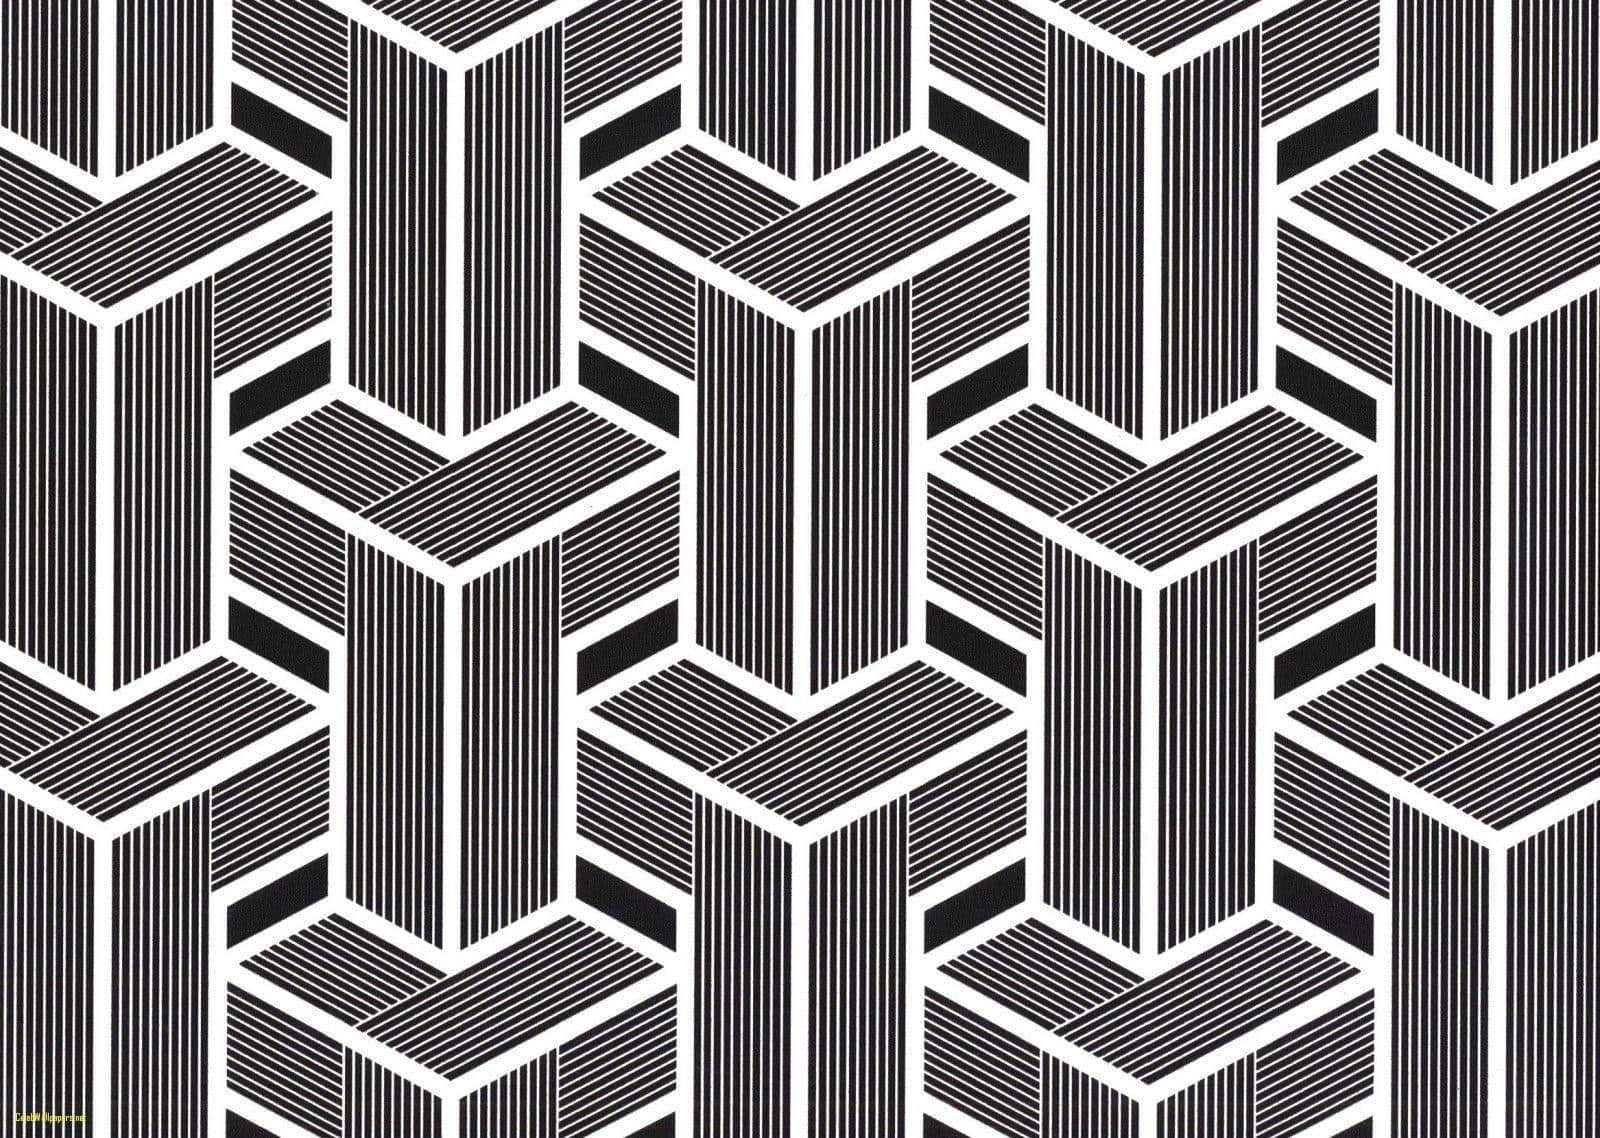 The  Modern Meets Art Deco in this Classic Computer Design Wallpaper